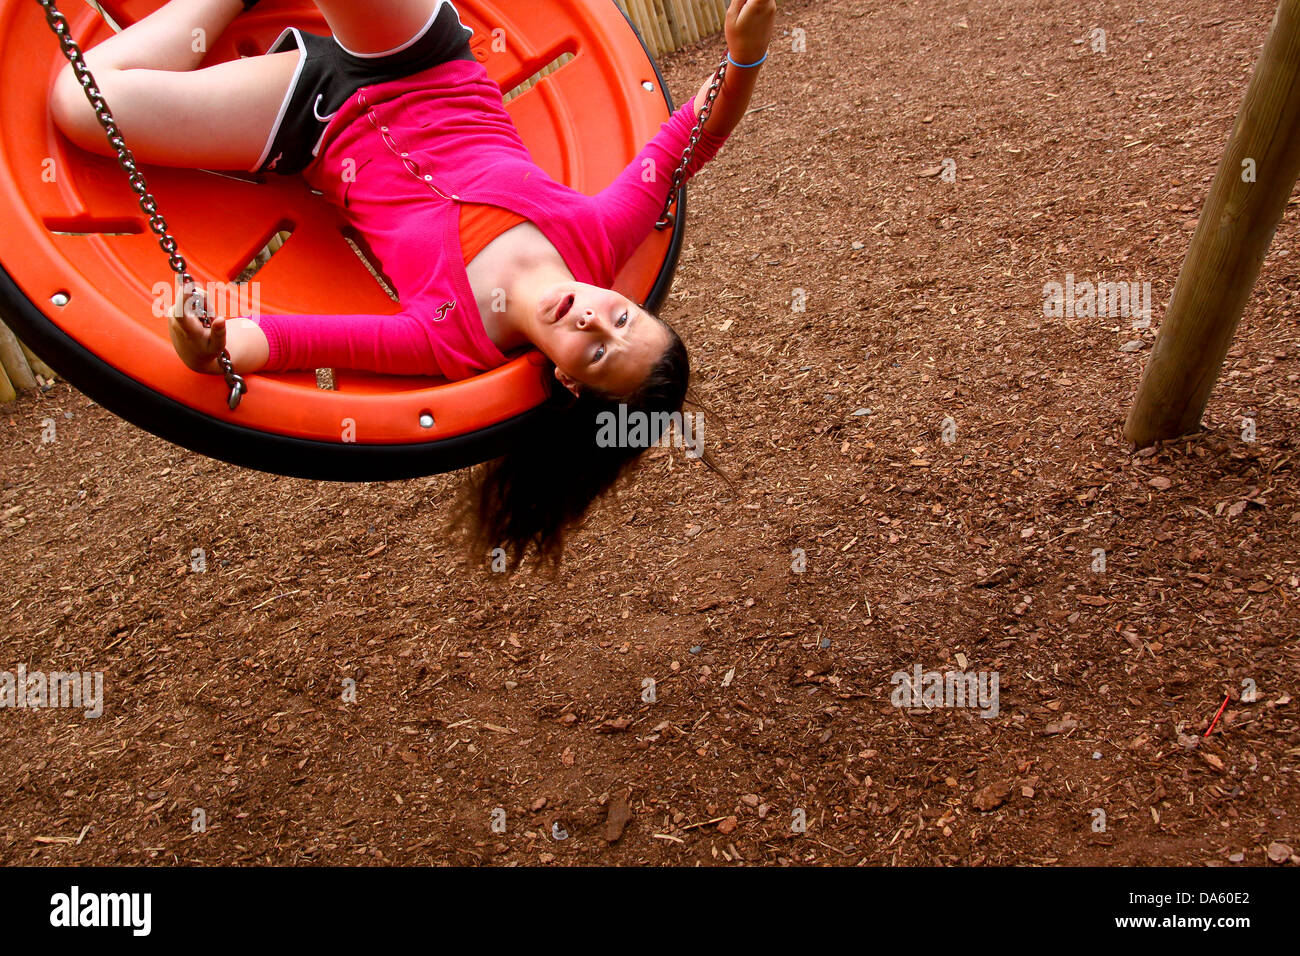 Young girl upside down on plastic disc swing Stock Photo